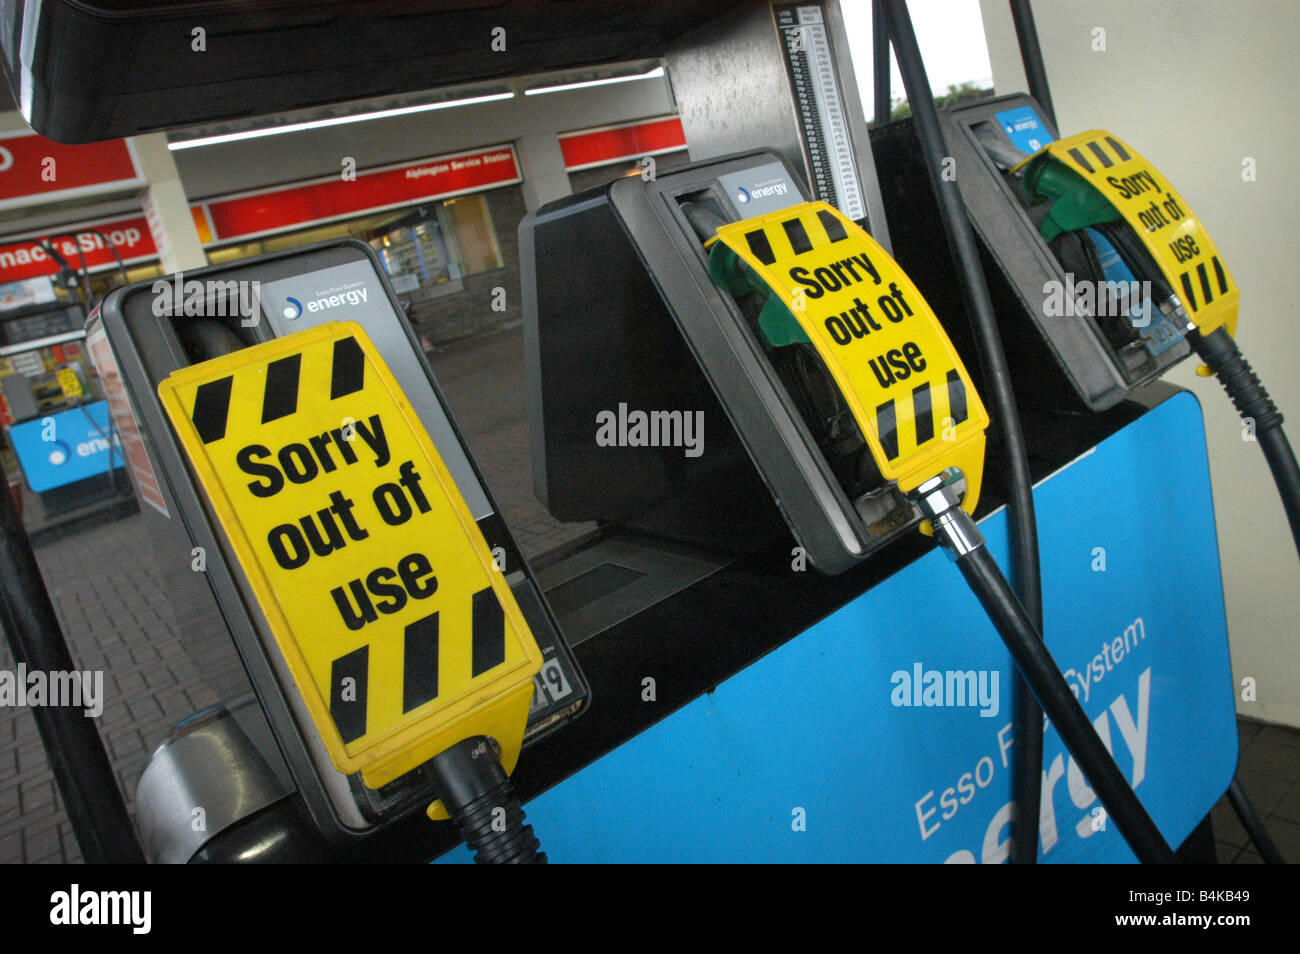 Sorry out of use signs at petrol pumps Stock Photo